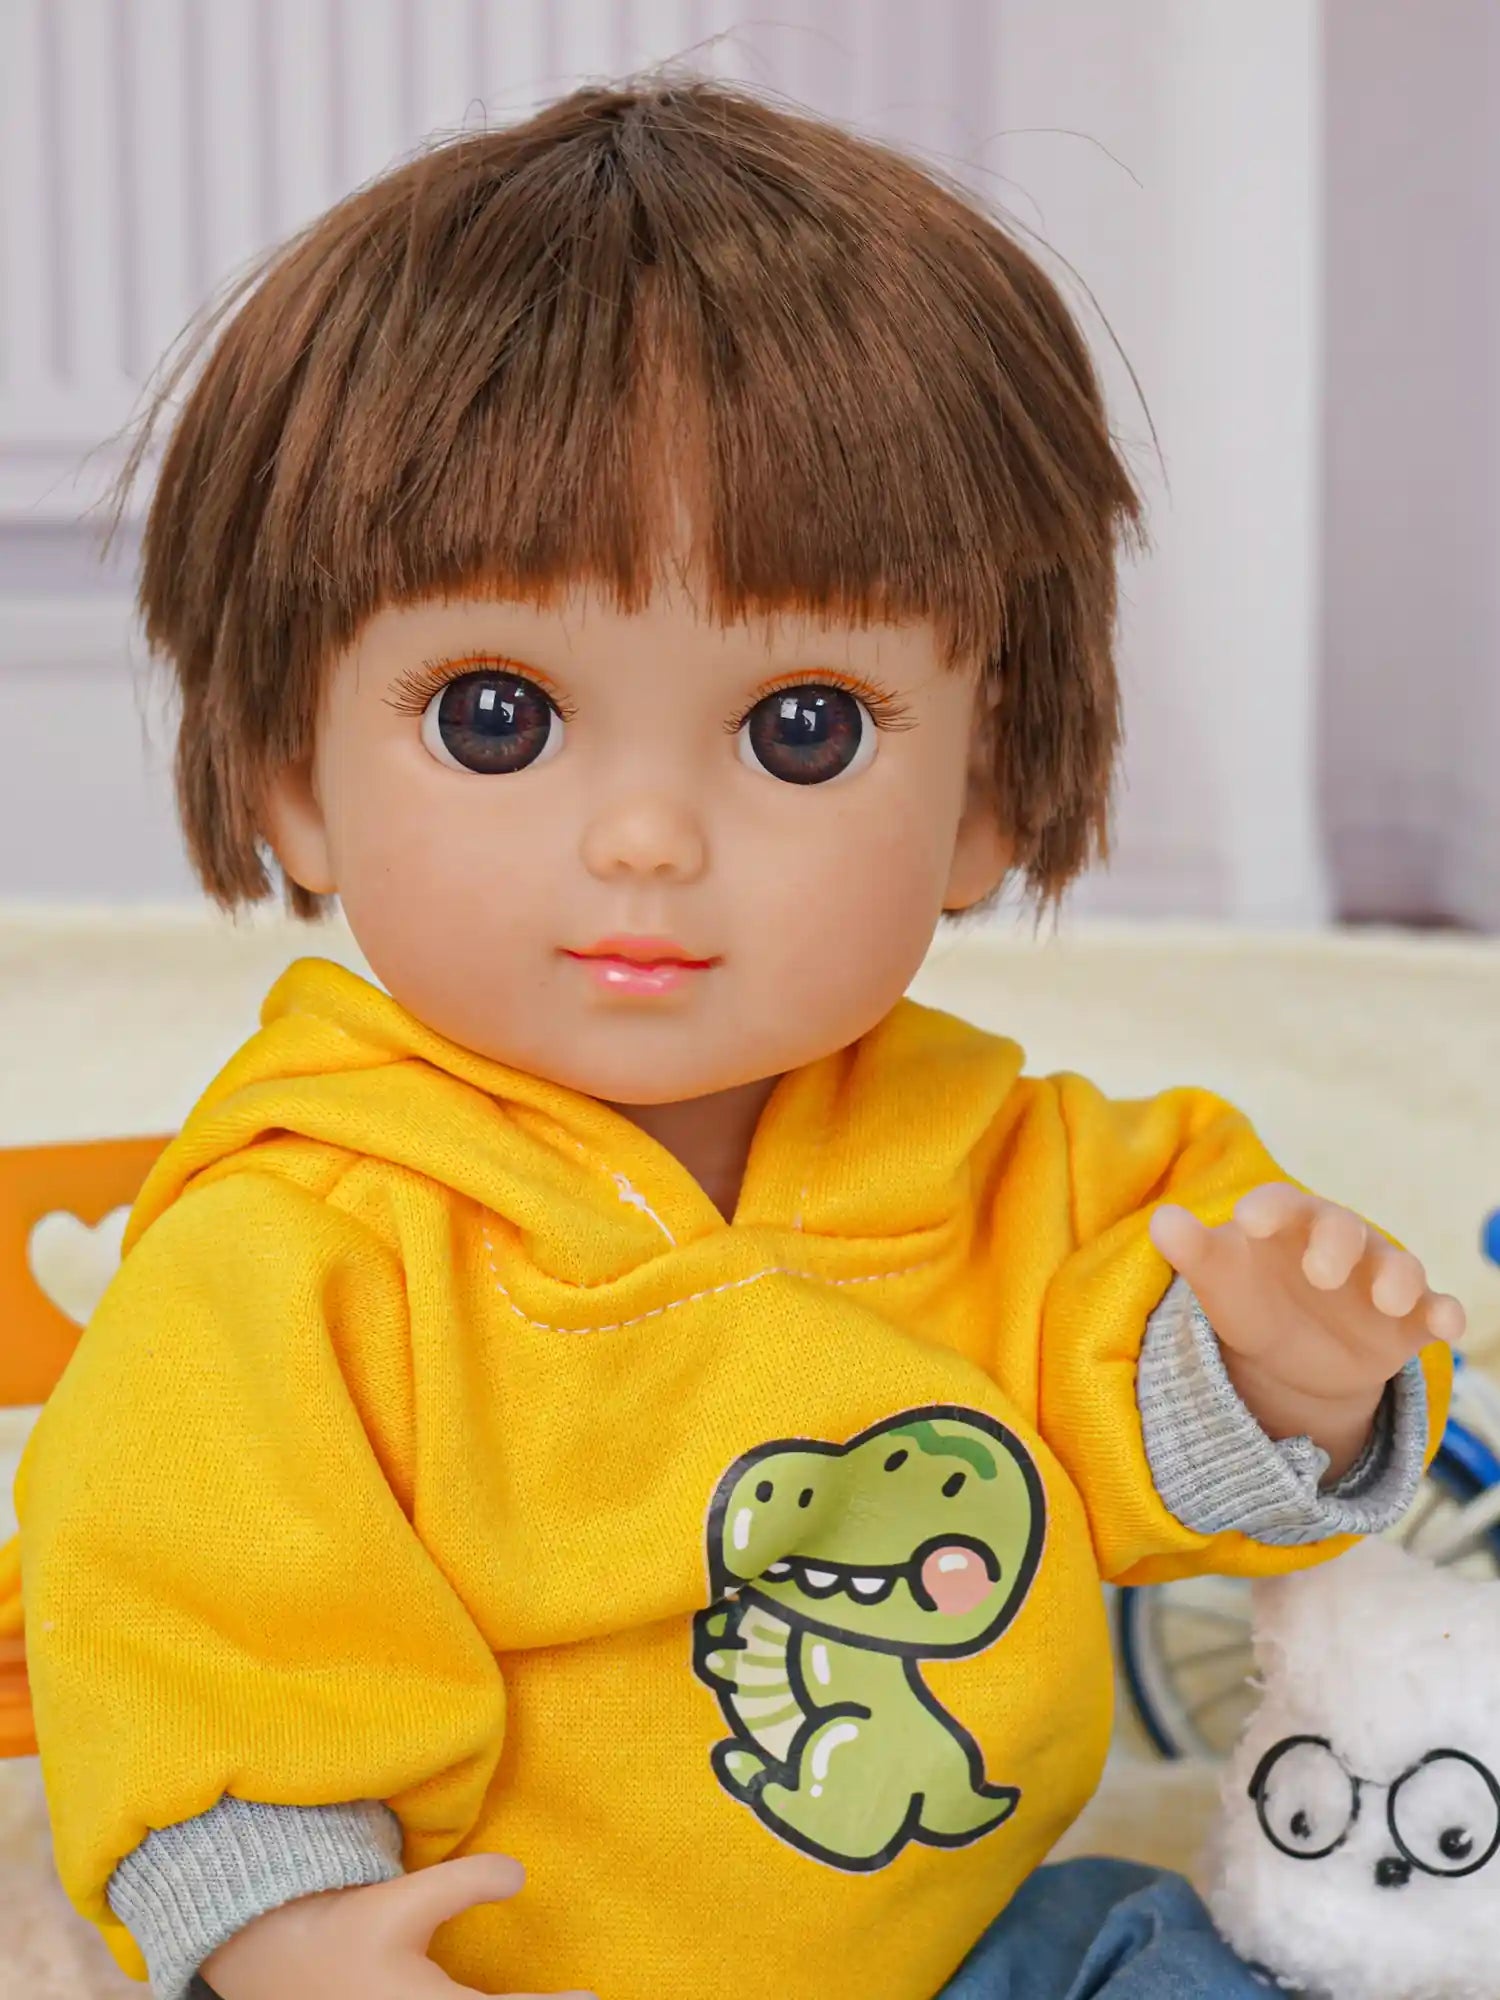 Toy doll in bright yellow and blue, with a plush canine companion and a miniature bicycle.